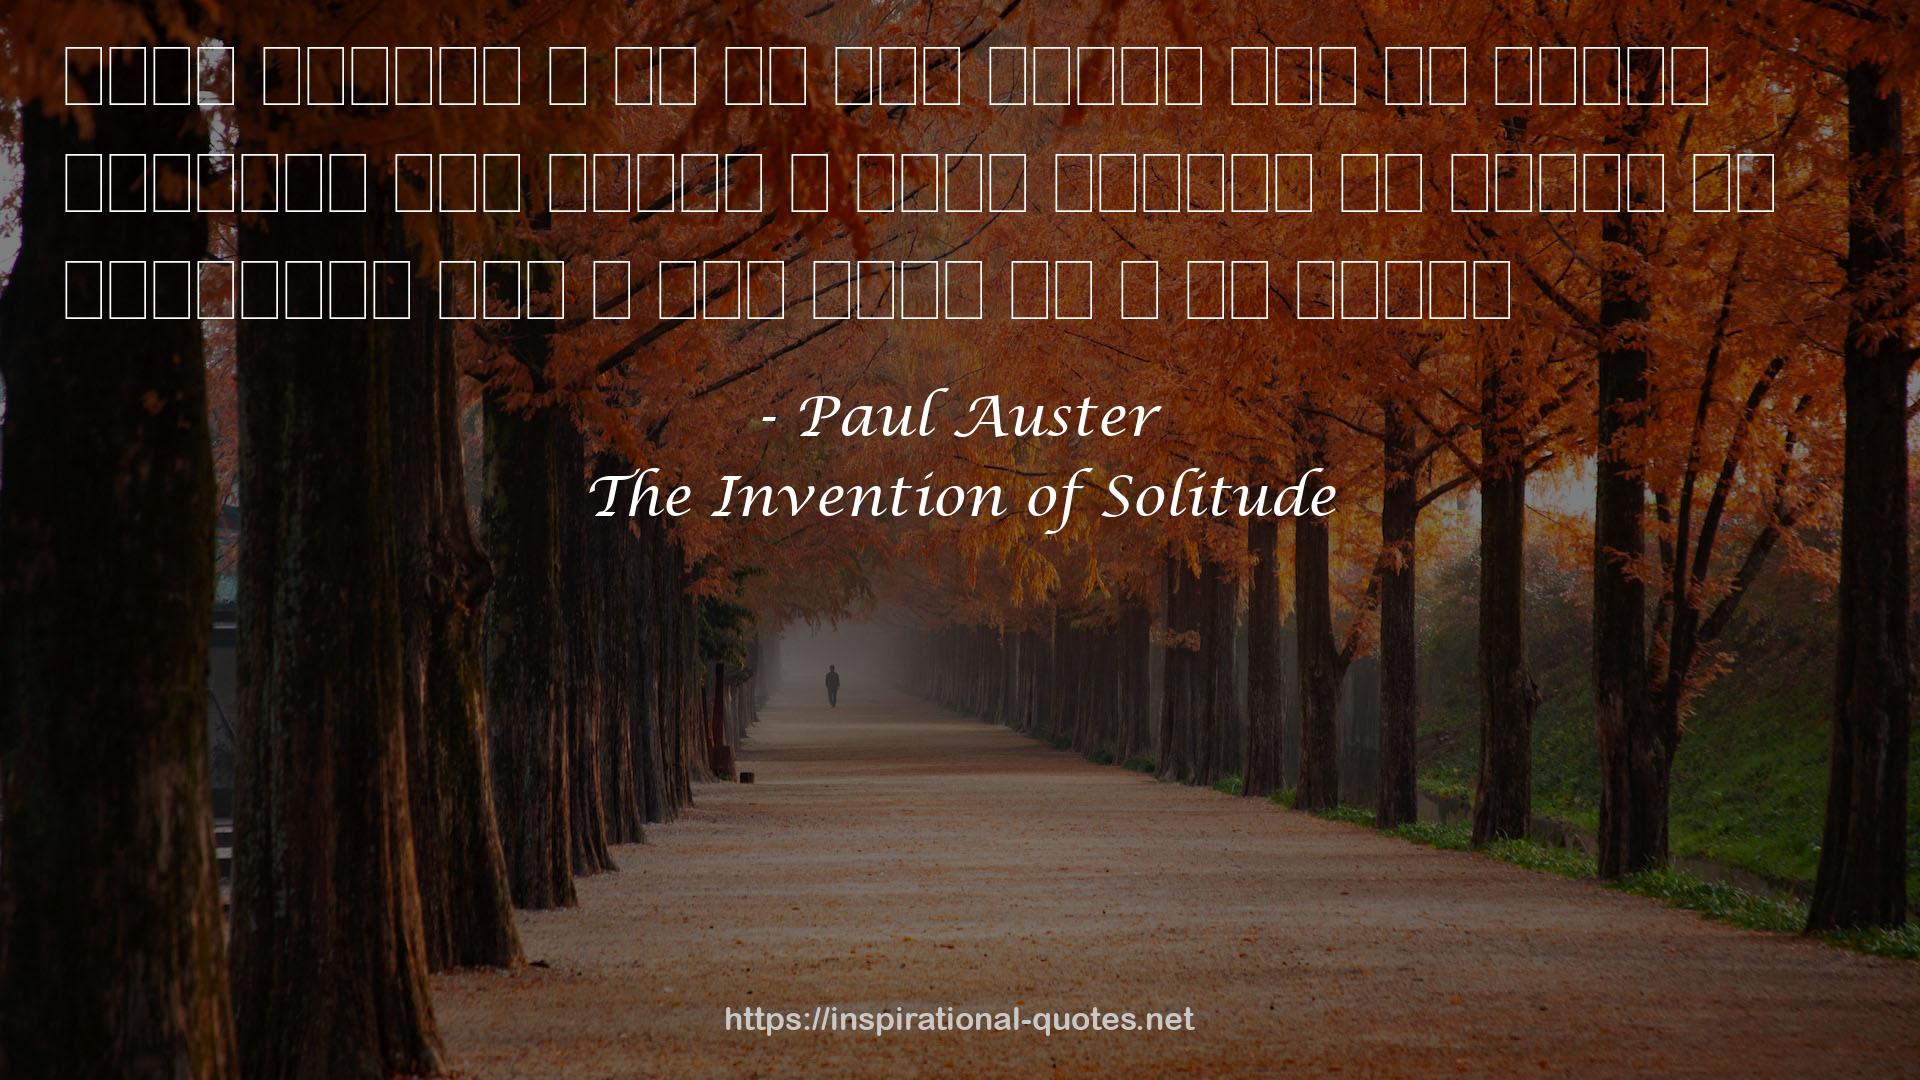 The Invention of Solitude QUOTES